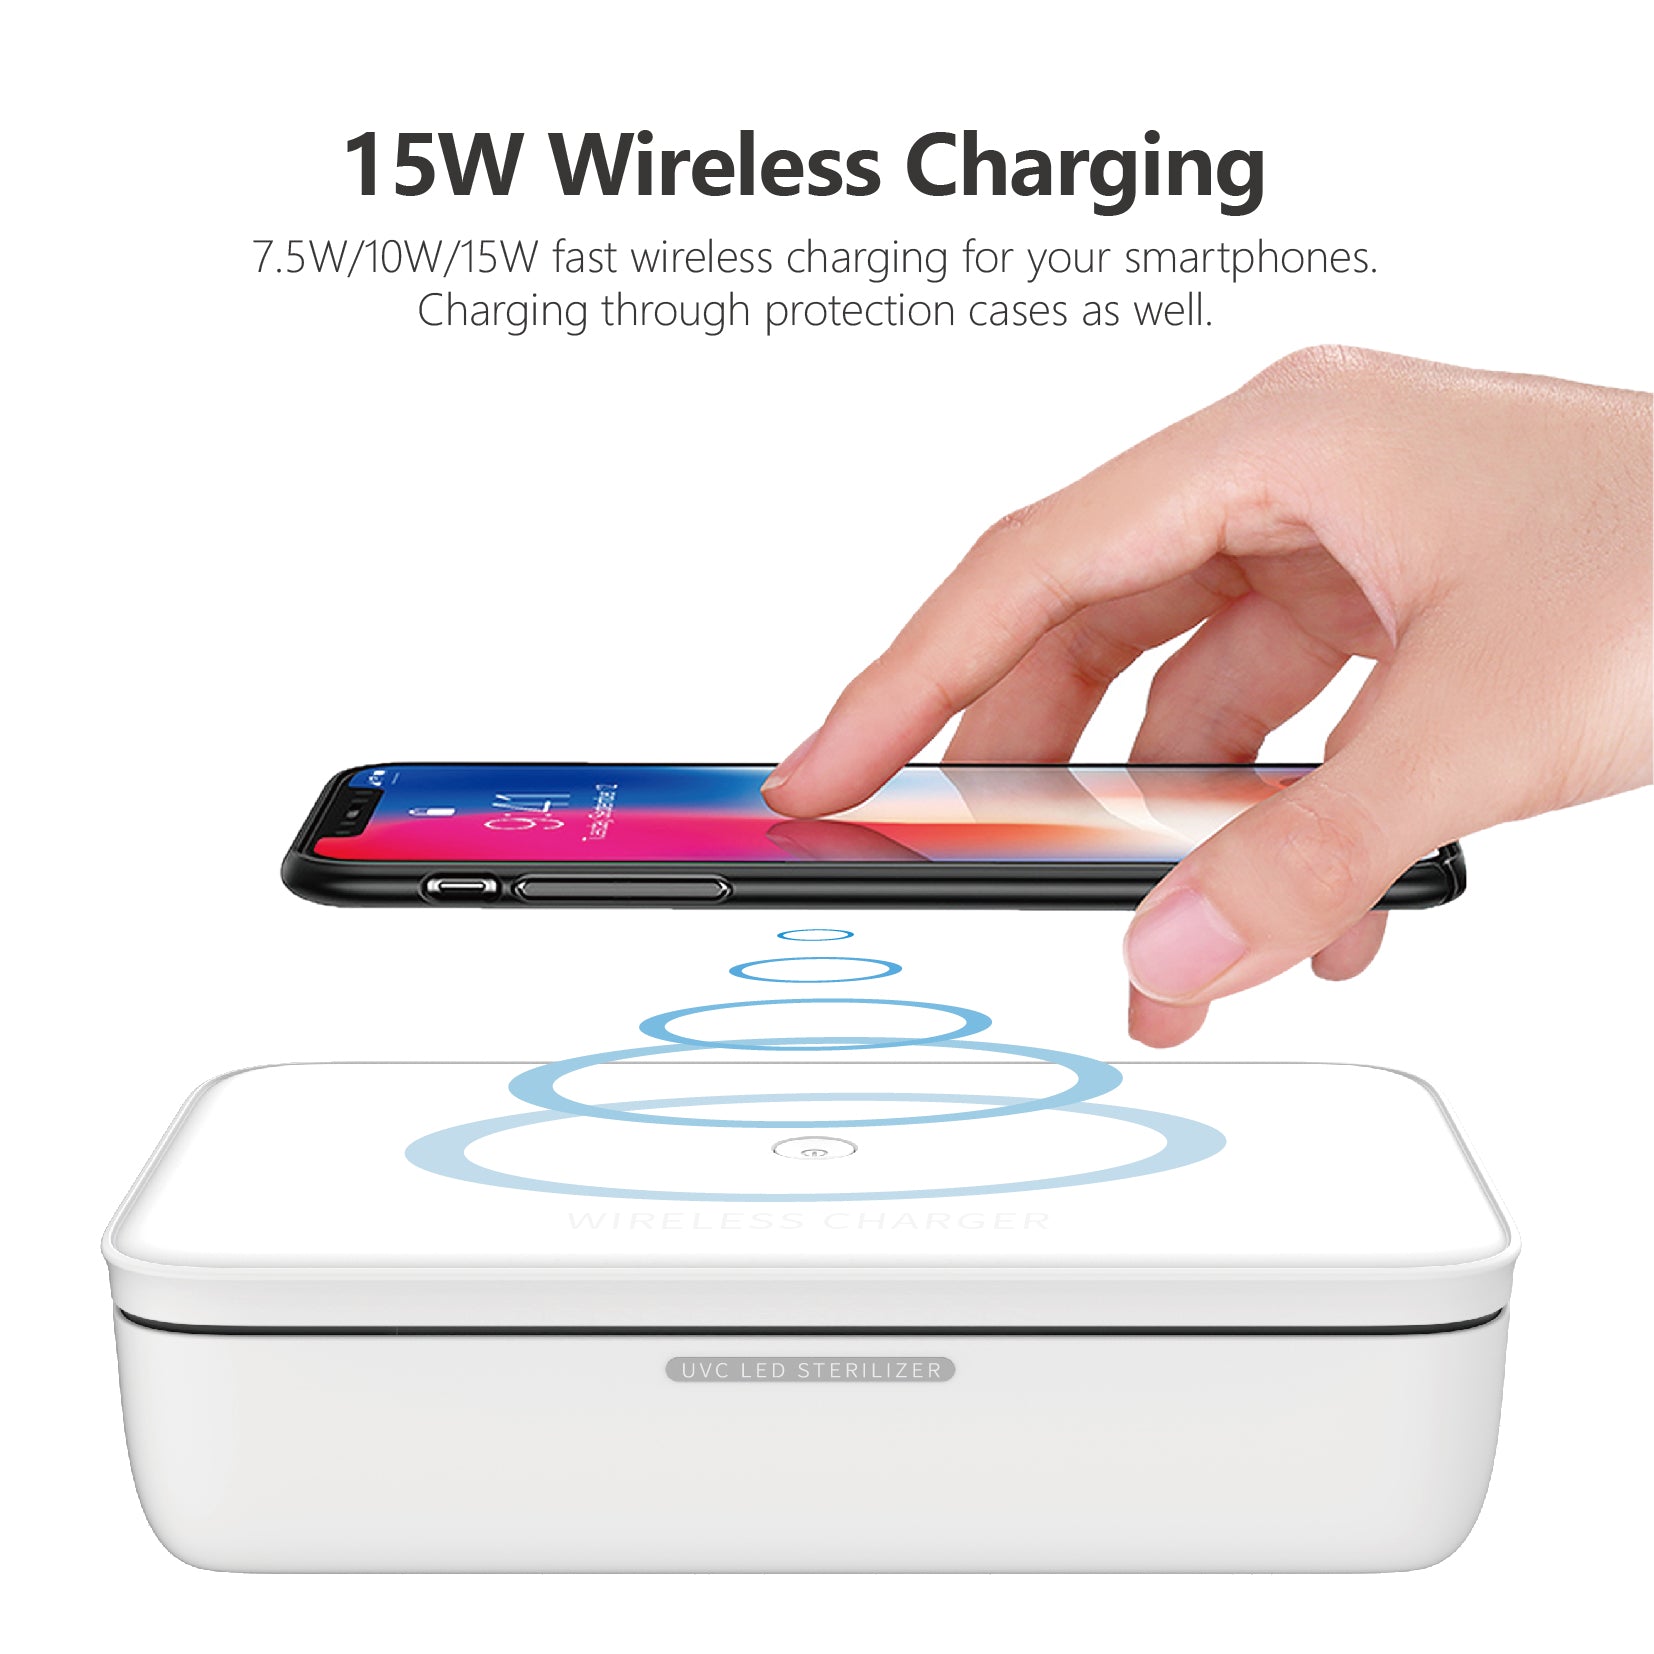 Portable UV Sterilizer Box with 15W Wireless Charger